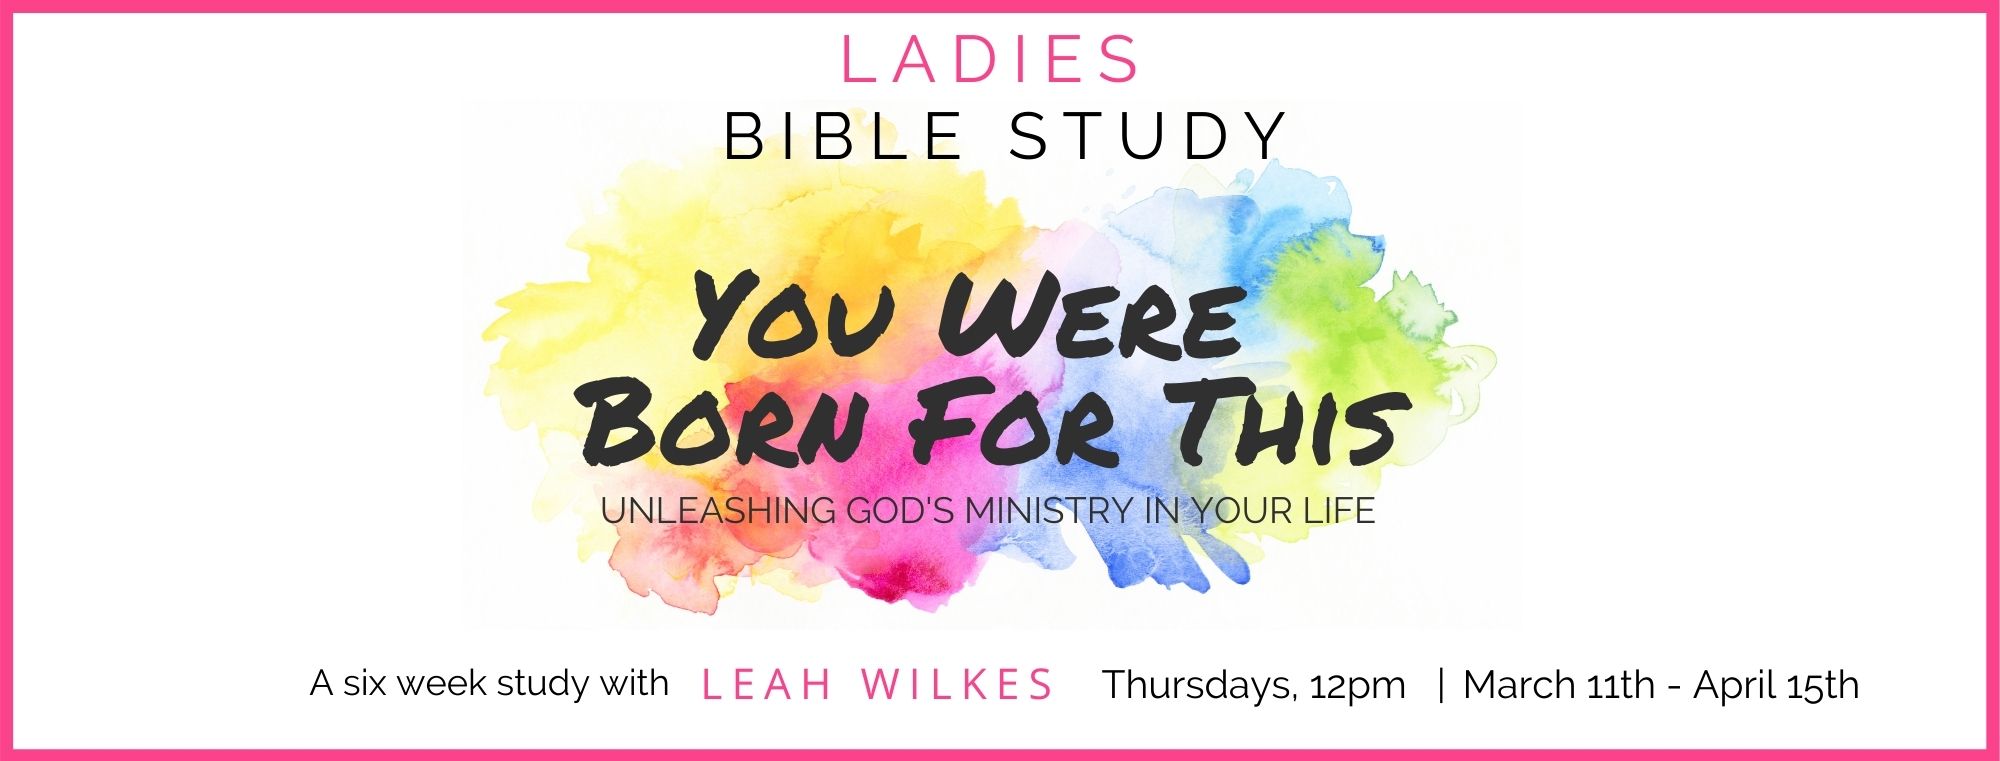 Ladies Bible Study with Leah Wilkes